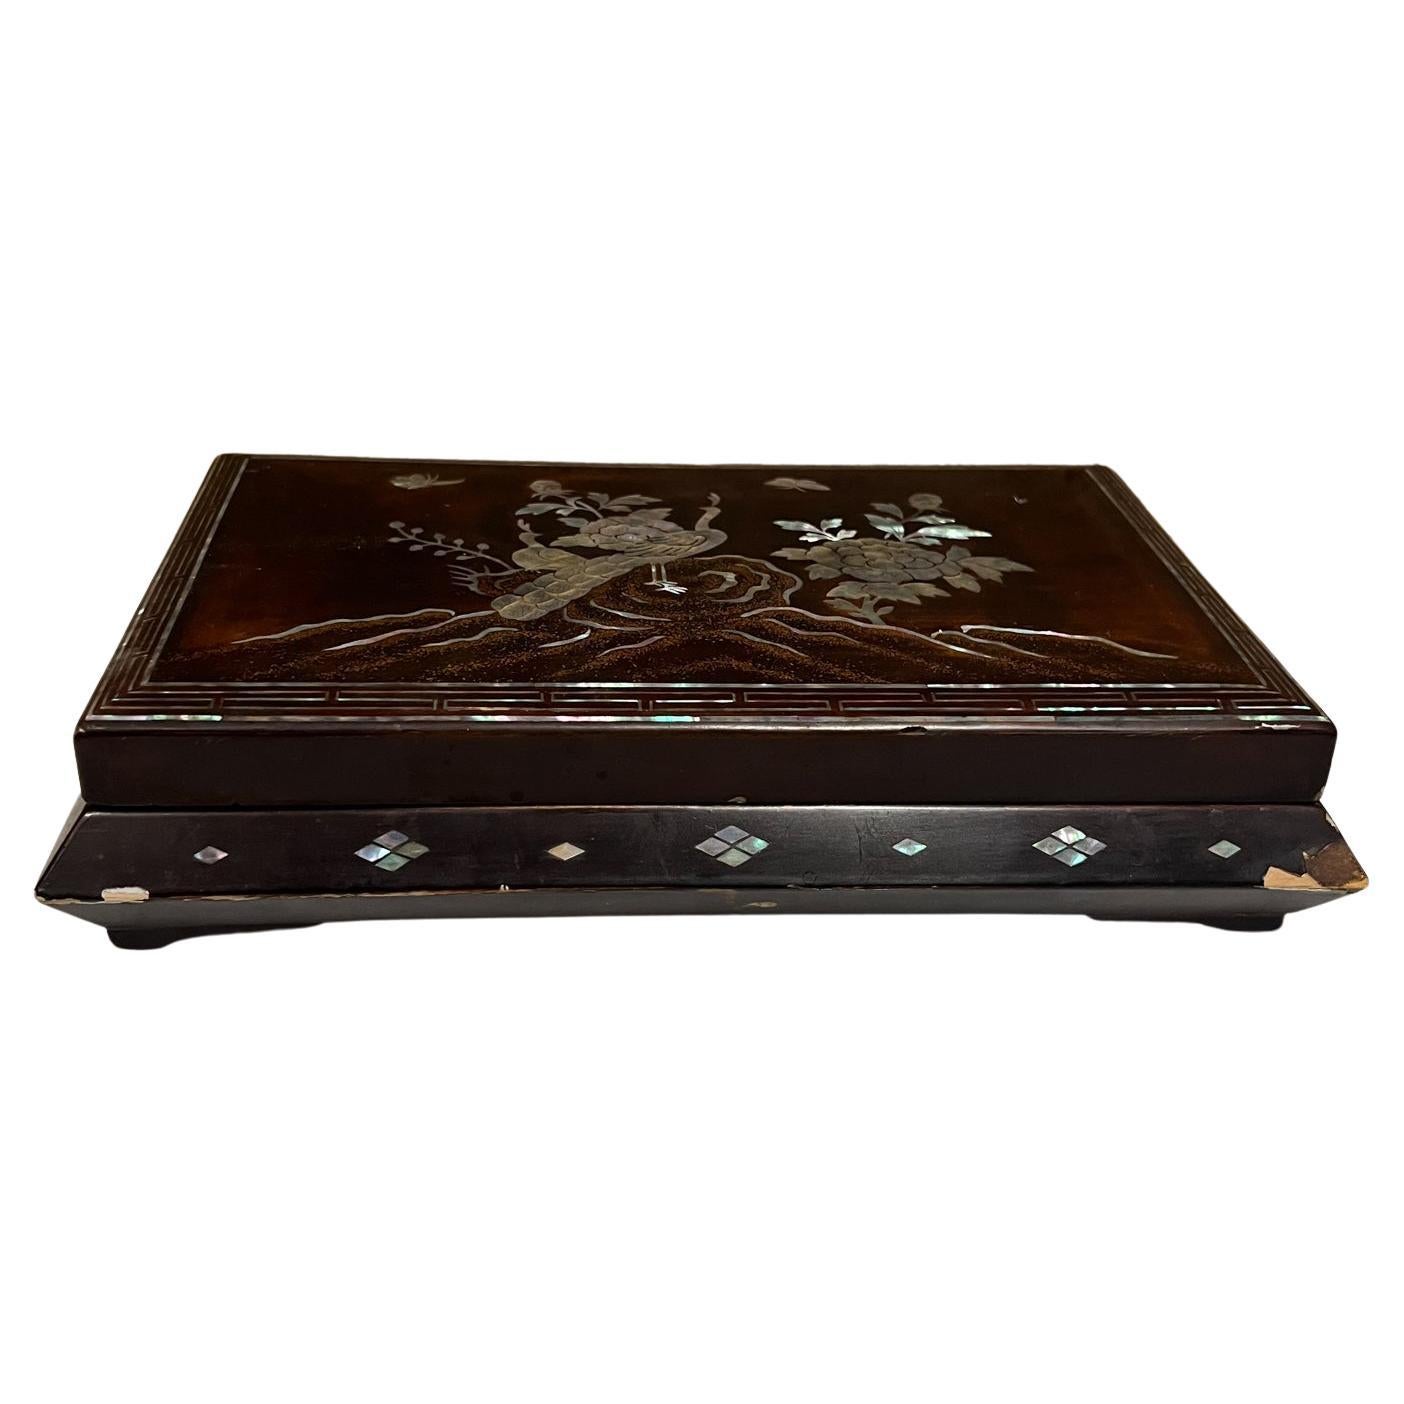 1920s Antique Chinese Decorative Smoking Box Wood and Mother of Pearl Inlay